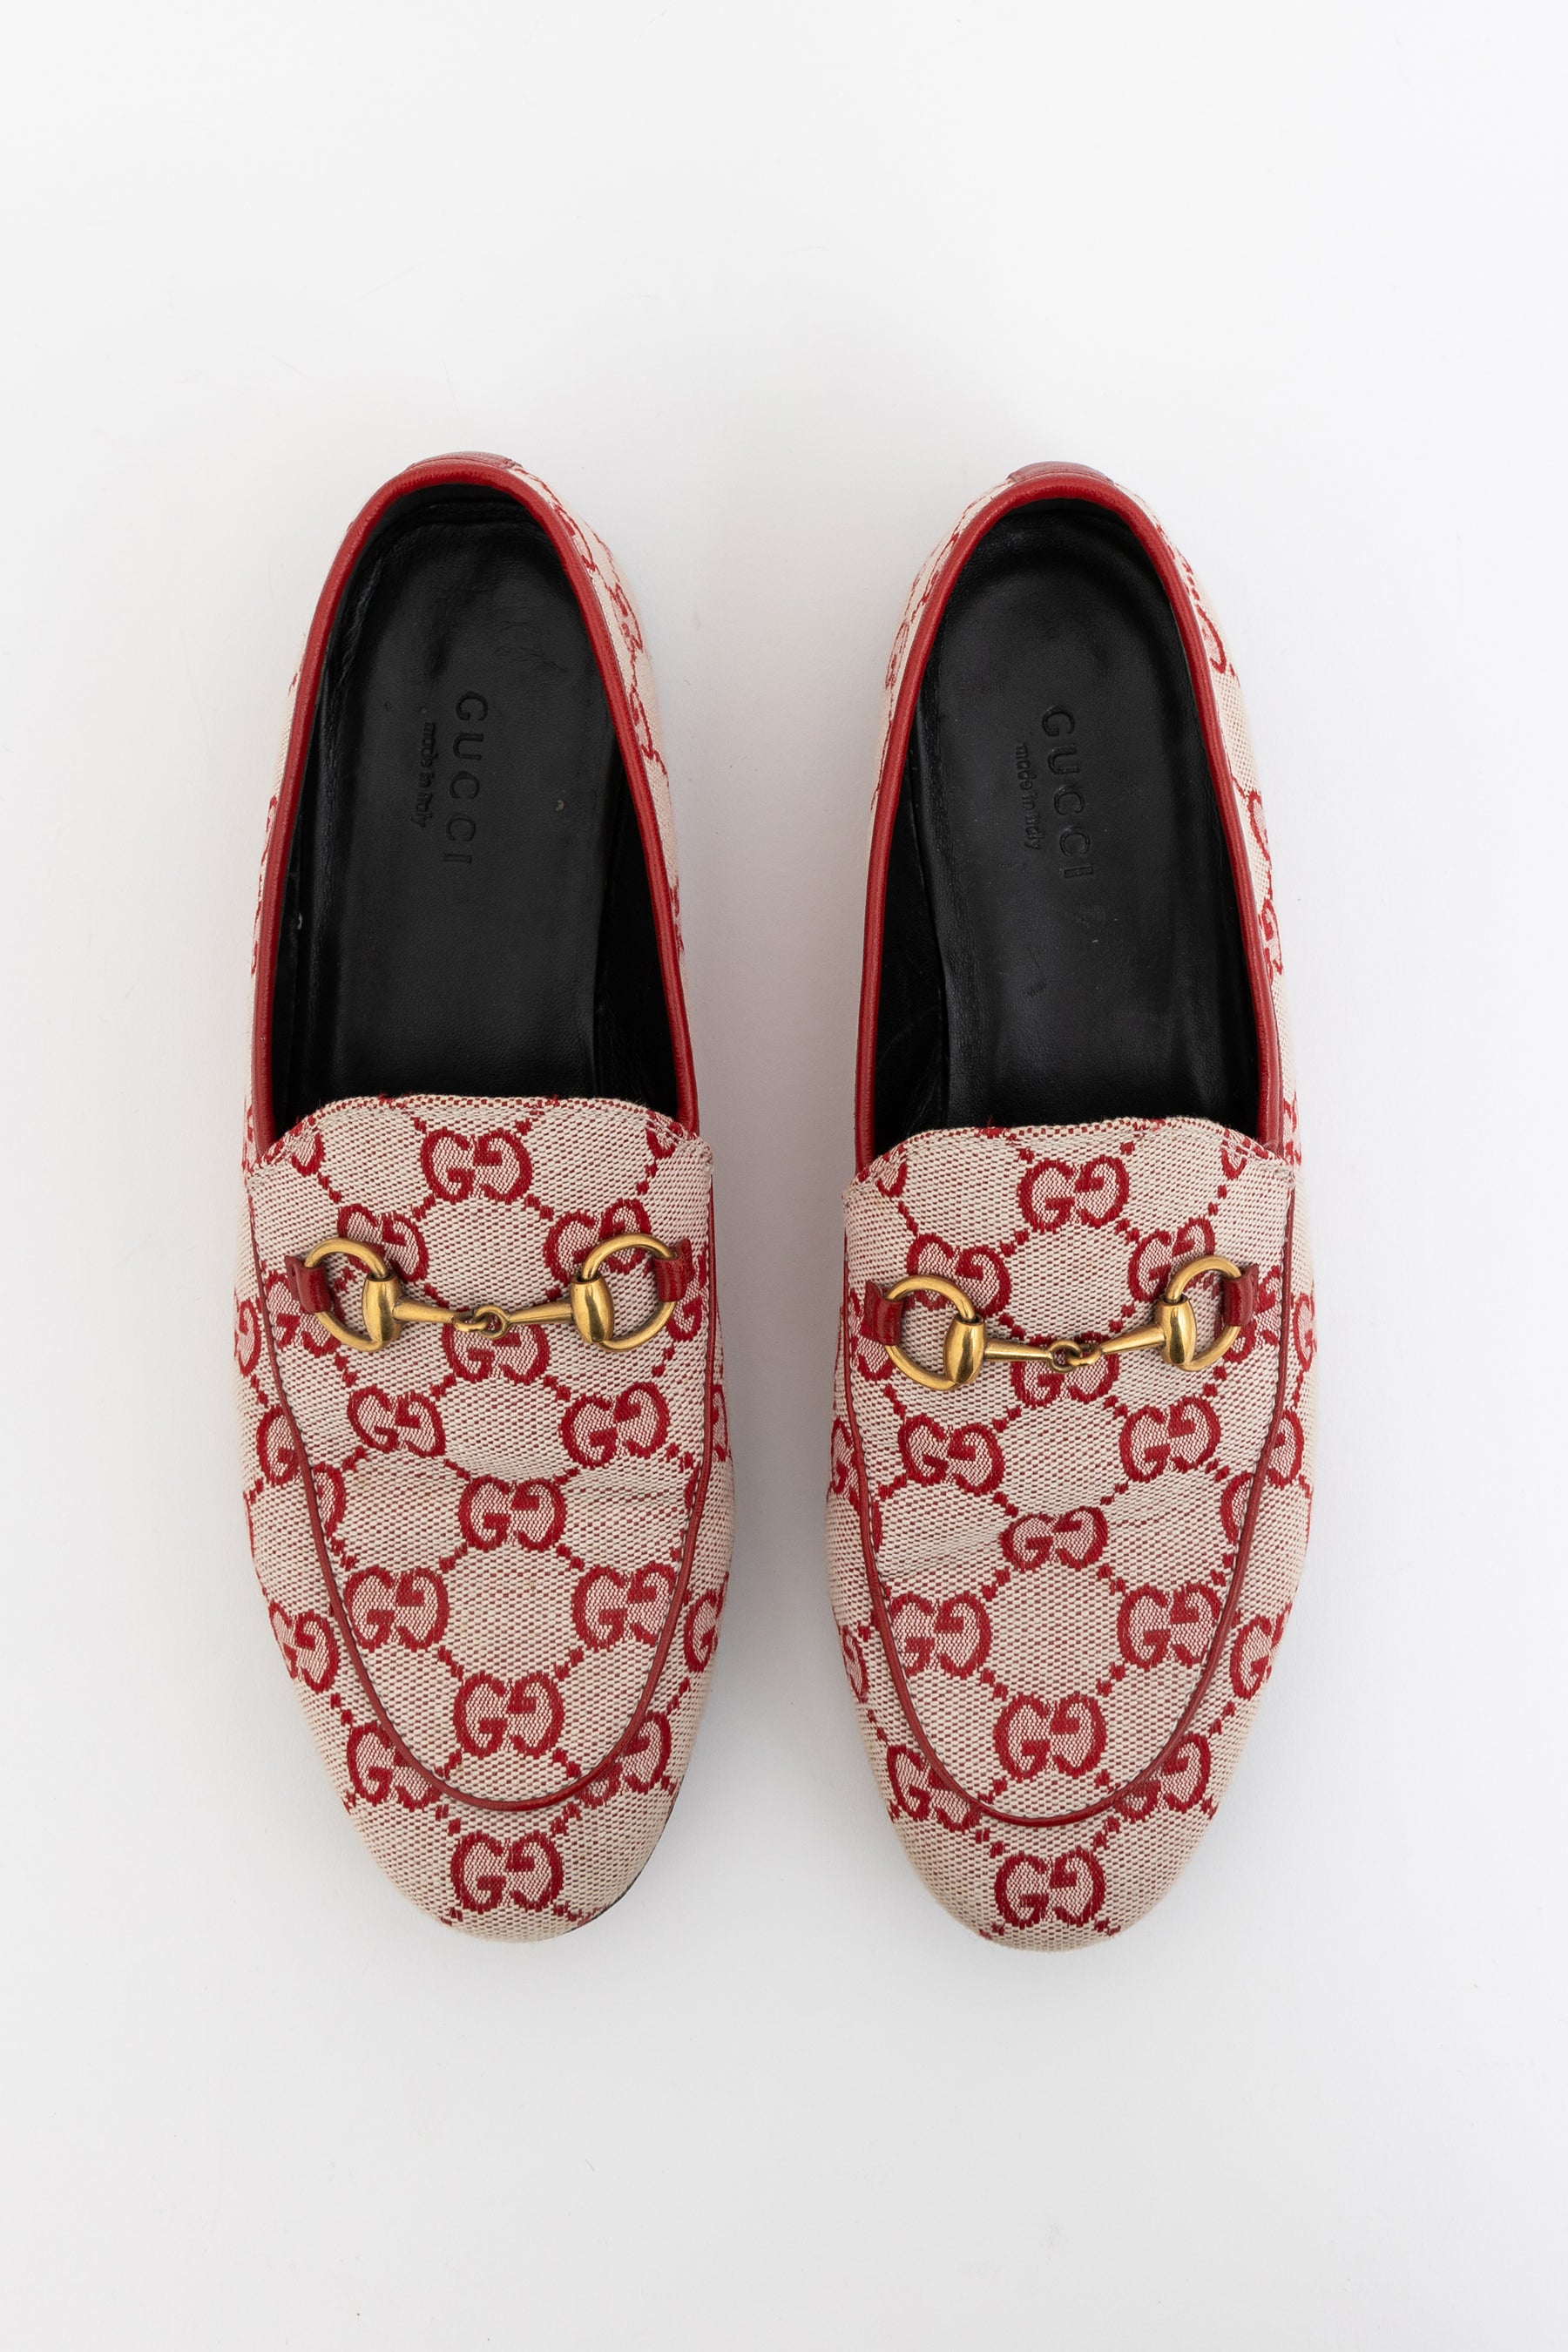 gucci-red-monogram-canvas-loafer-36-9741